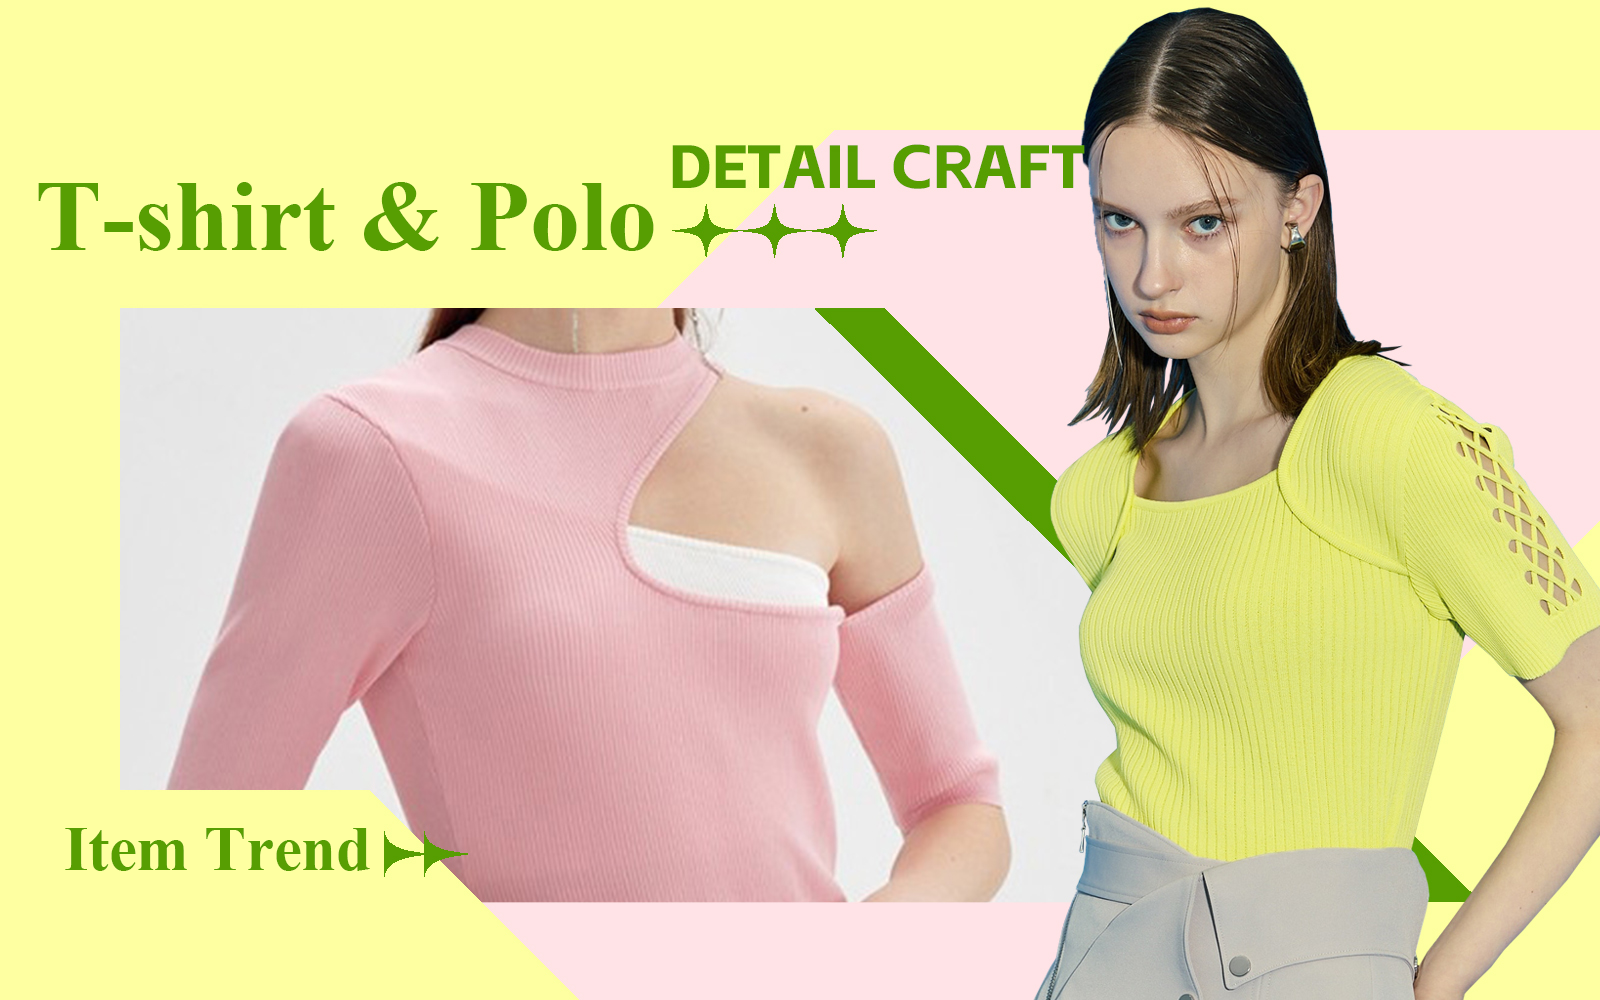 T-shirt & Polo -- S/S 2024 Item Trend for Women's Knitwear